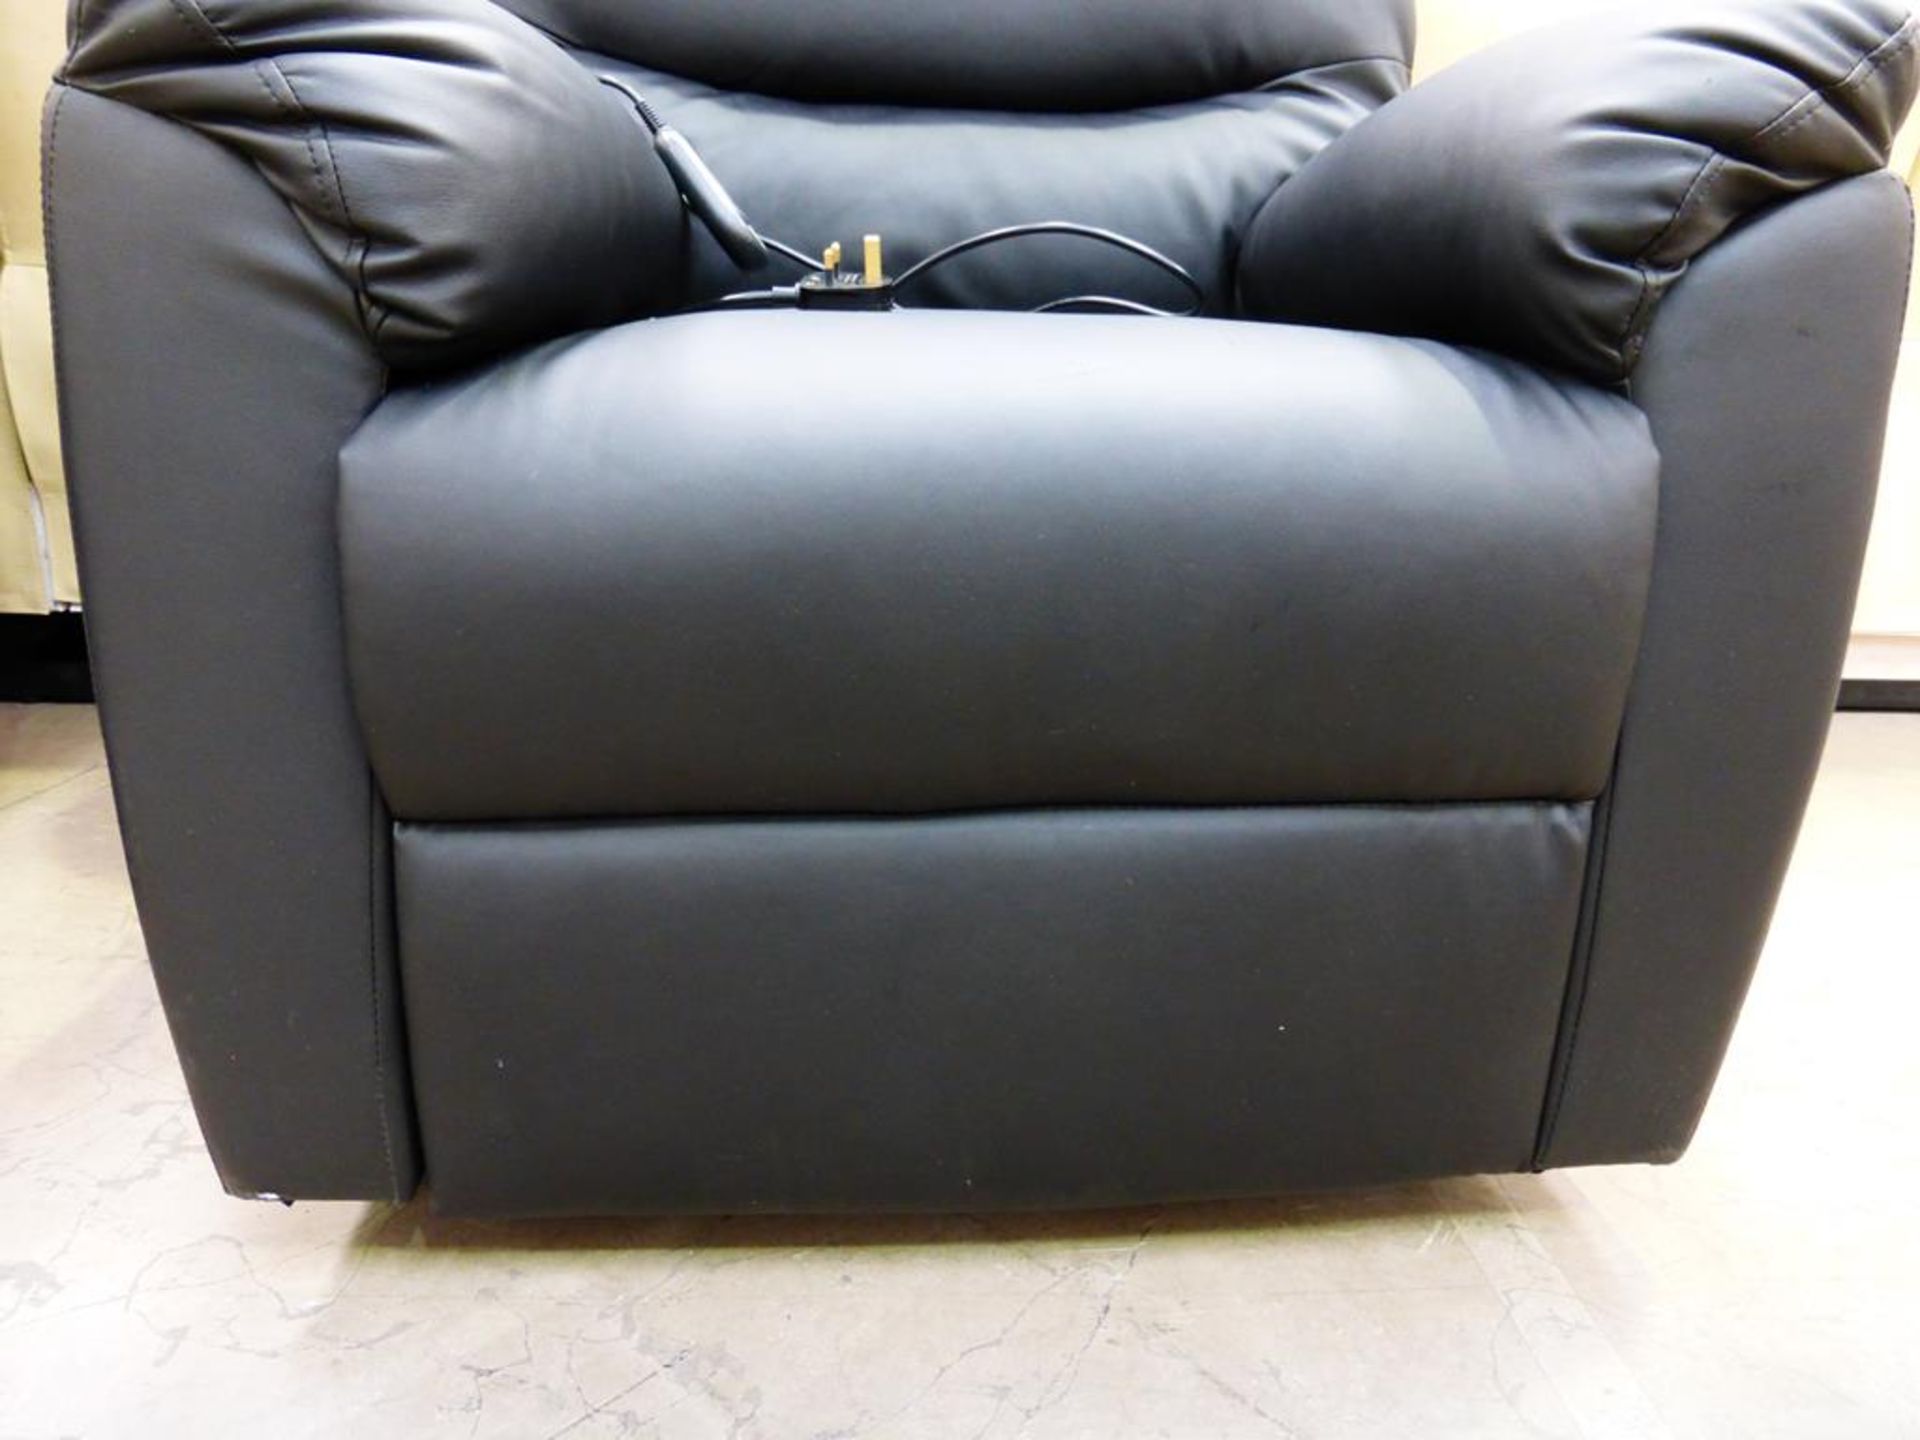 Birlea Regency Rise and Fall Recline Faux Leather Chair with a motorised tilt feature for easy - Image 5 of 7